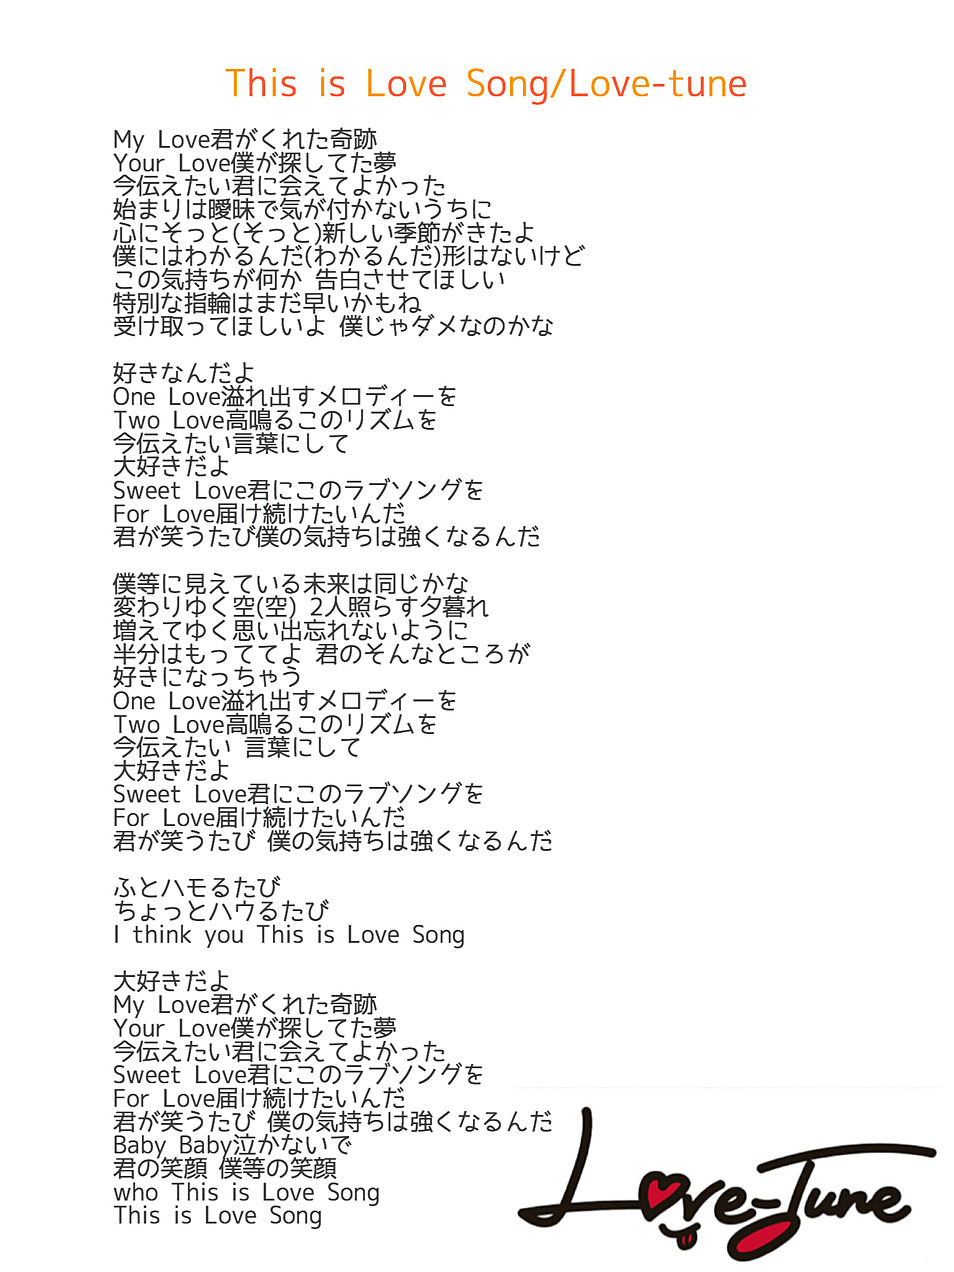 This Is Love Song 完全無料画像検索のプリ画像 Bygmo